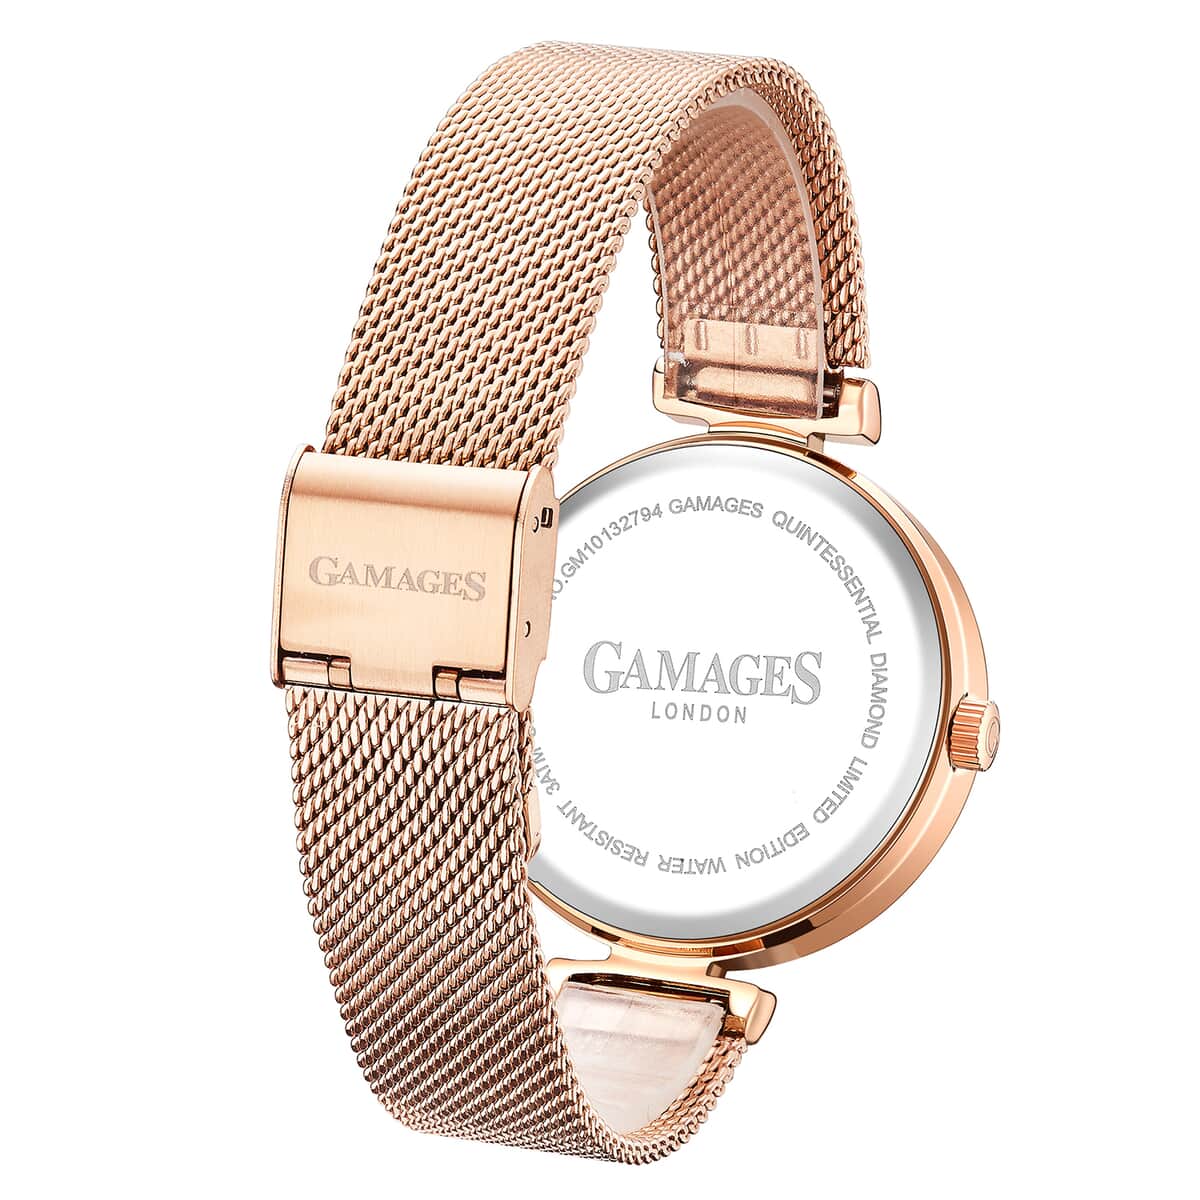 GAMAGES OF LONDON Quintessential Diamond Swiss Quartz Movement Mesh Strap Watch in ION Plated RG Over Stainless Steel (38mm) image number 3